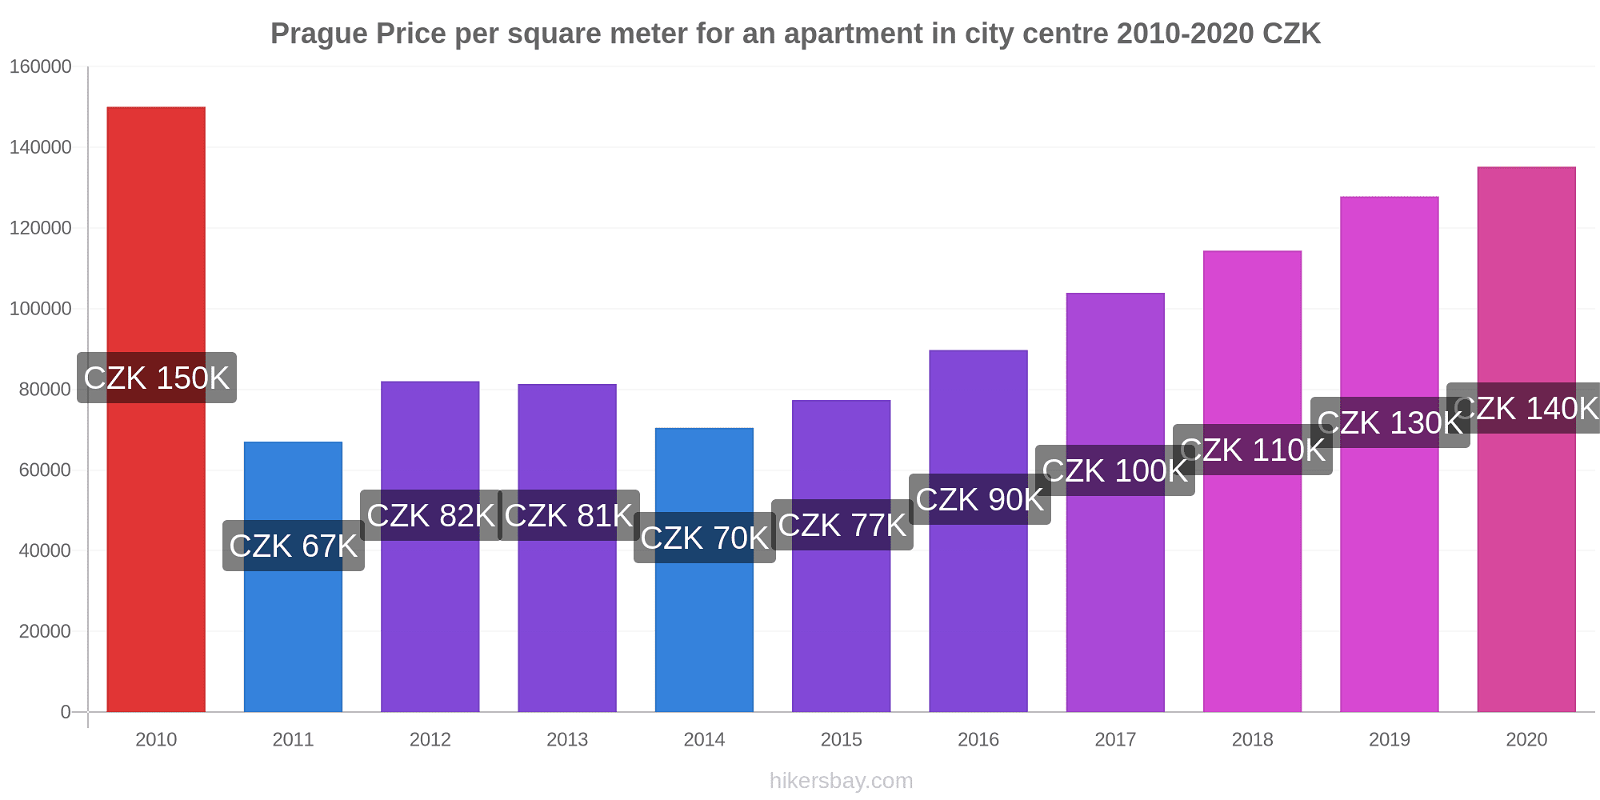 Prague price changes Price per square meter for an apartment in city centre hikersbay.com